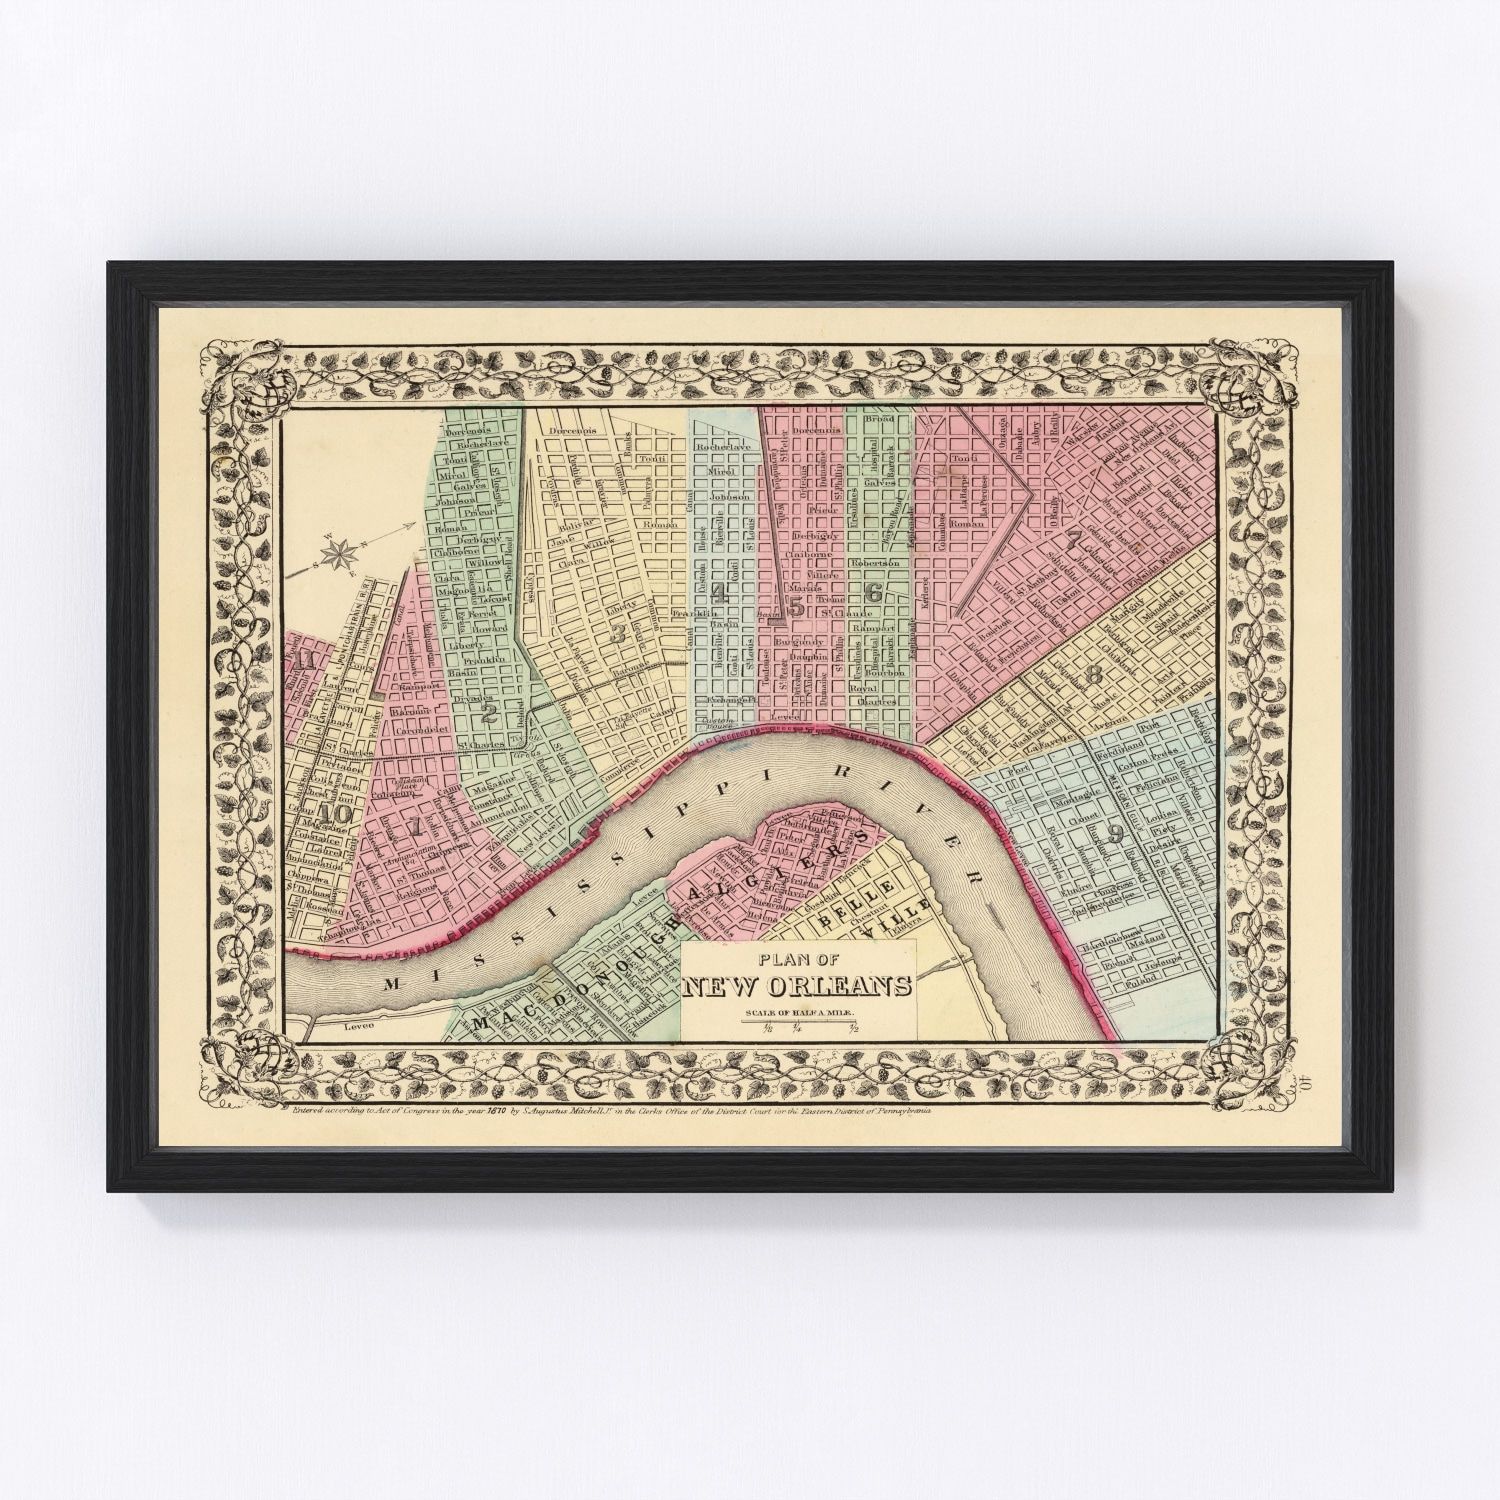 Unframed Colorful Street Map Poster New Orleans Louisiana Art Print